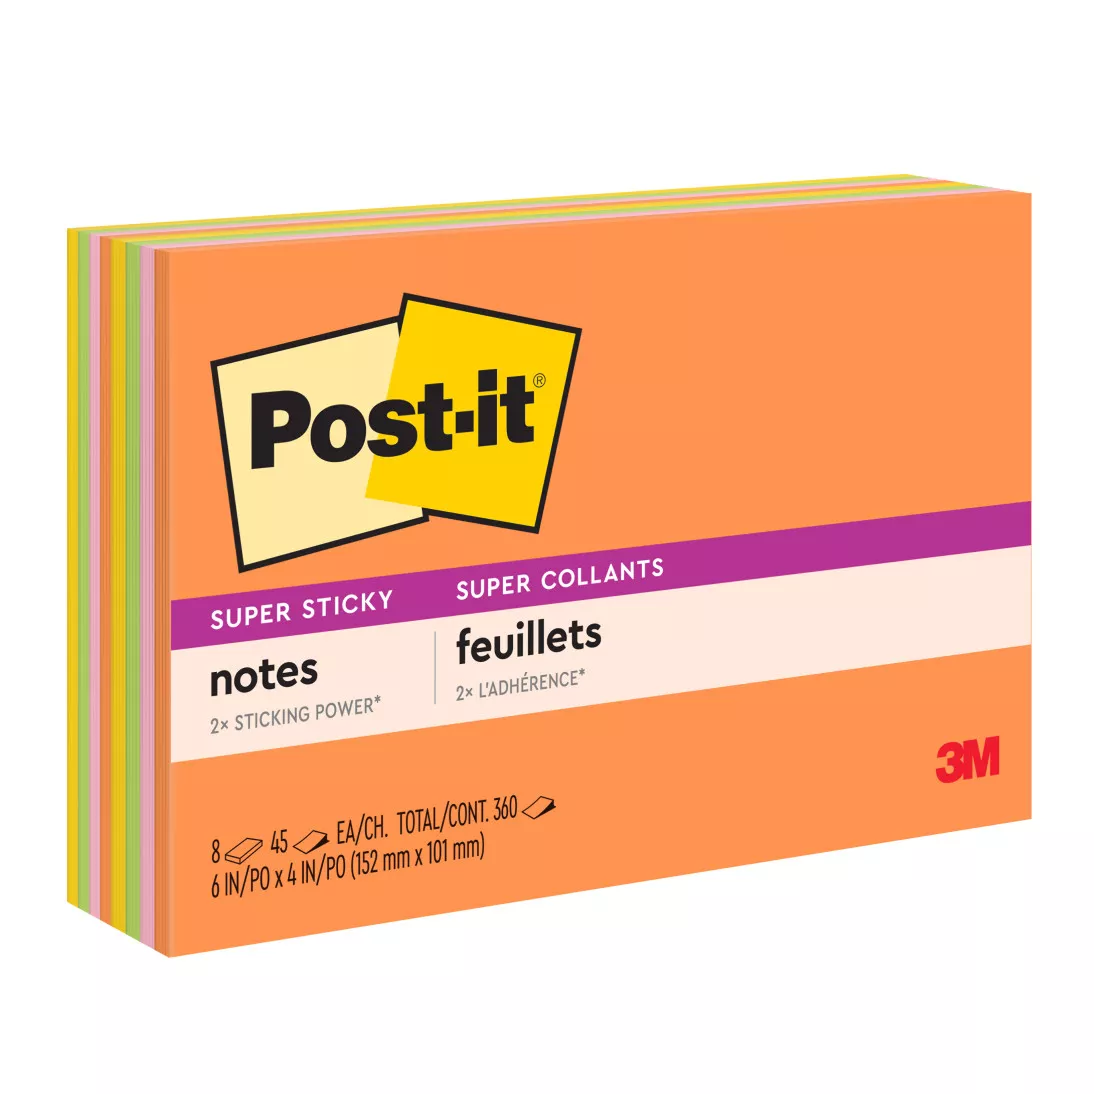 Post-it® Super Sticky Notes 6445-SSP, 6 in x 4 in (152 mm x 101 mm), Energy Boost